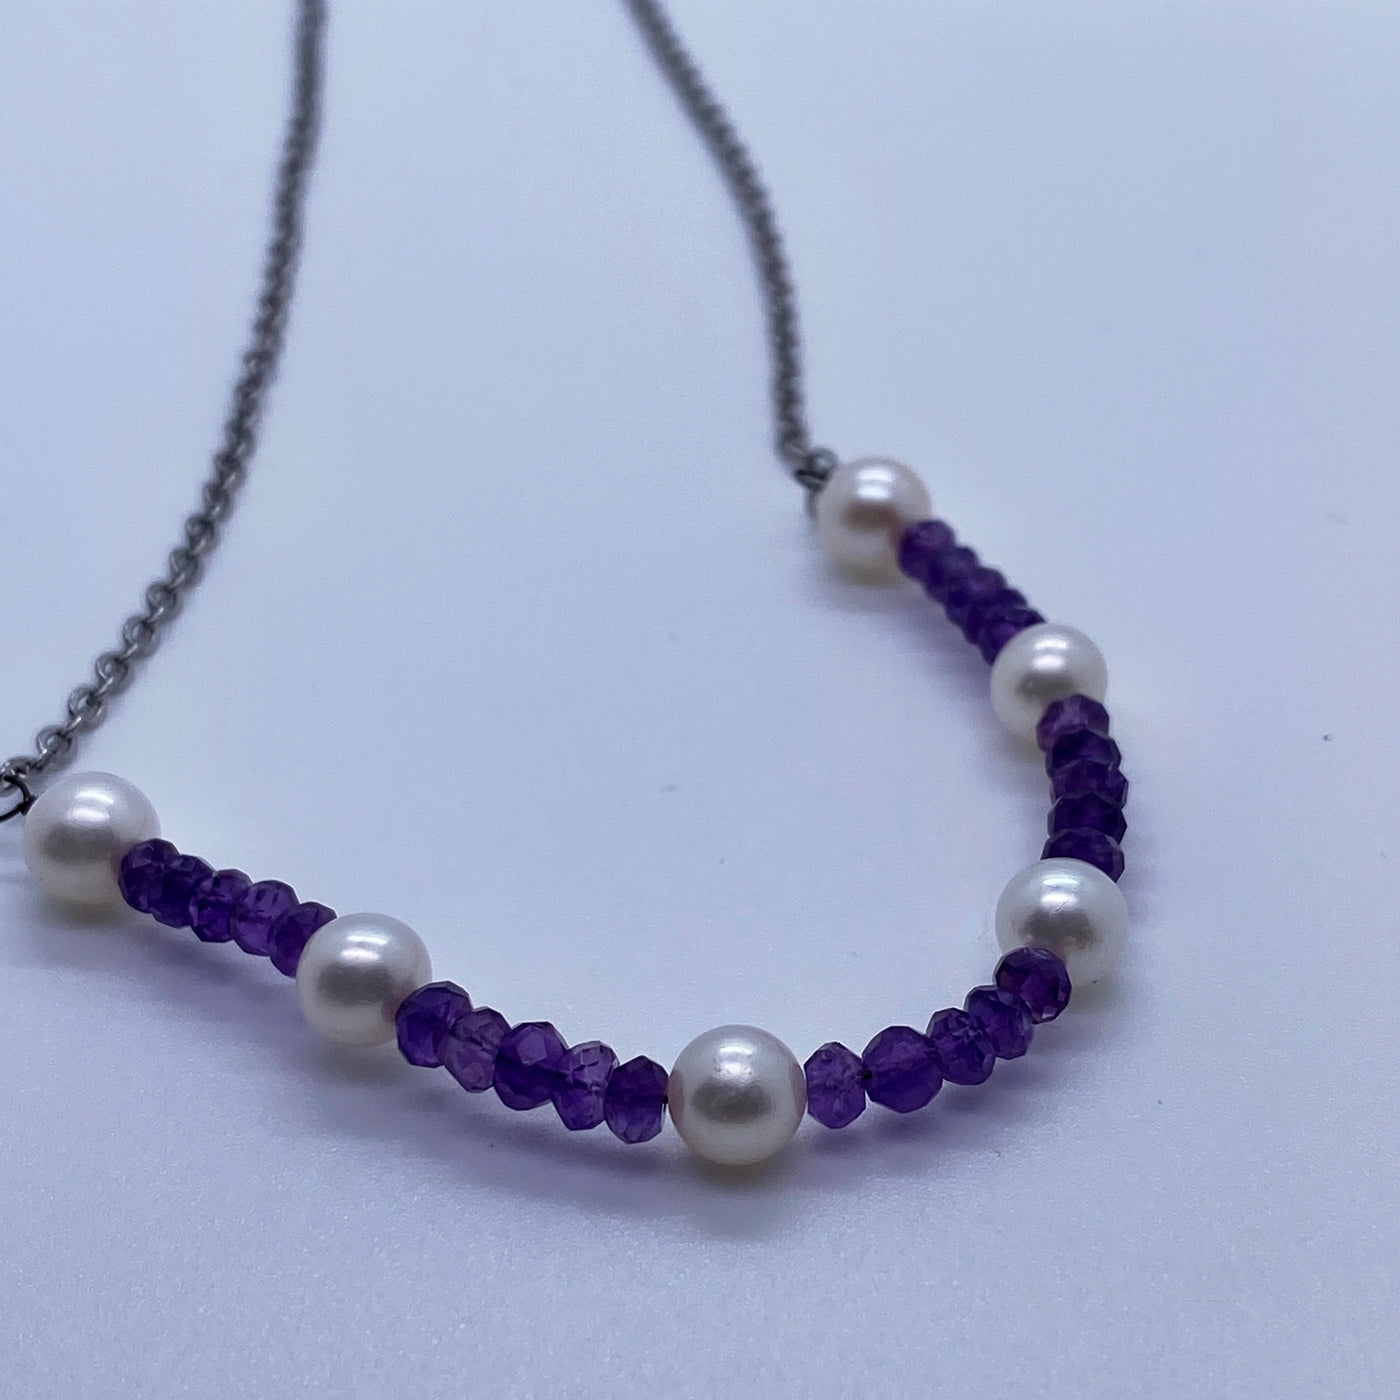 Pearls and amethyst on silver chain necklace